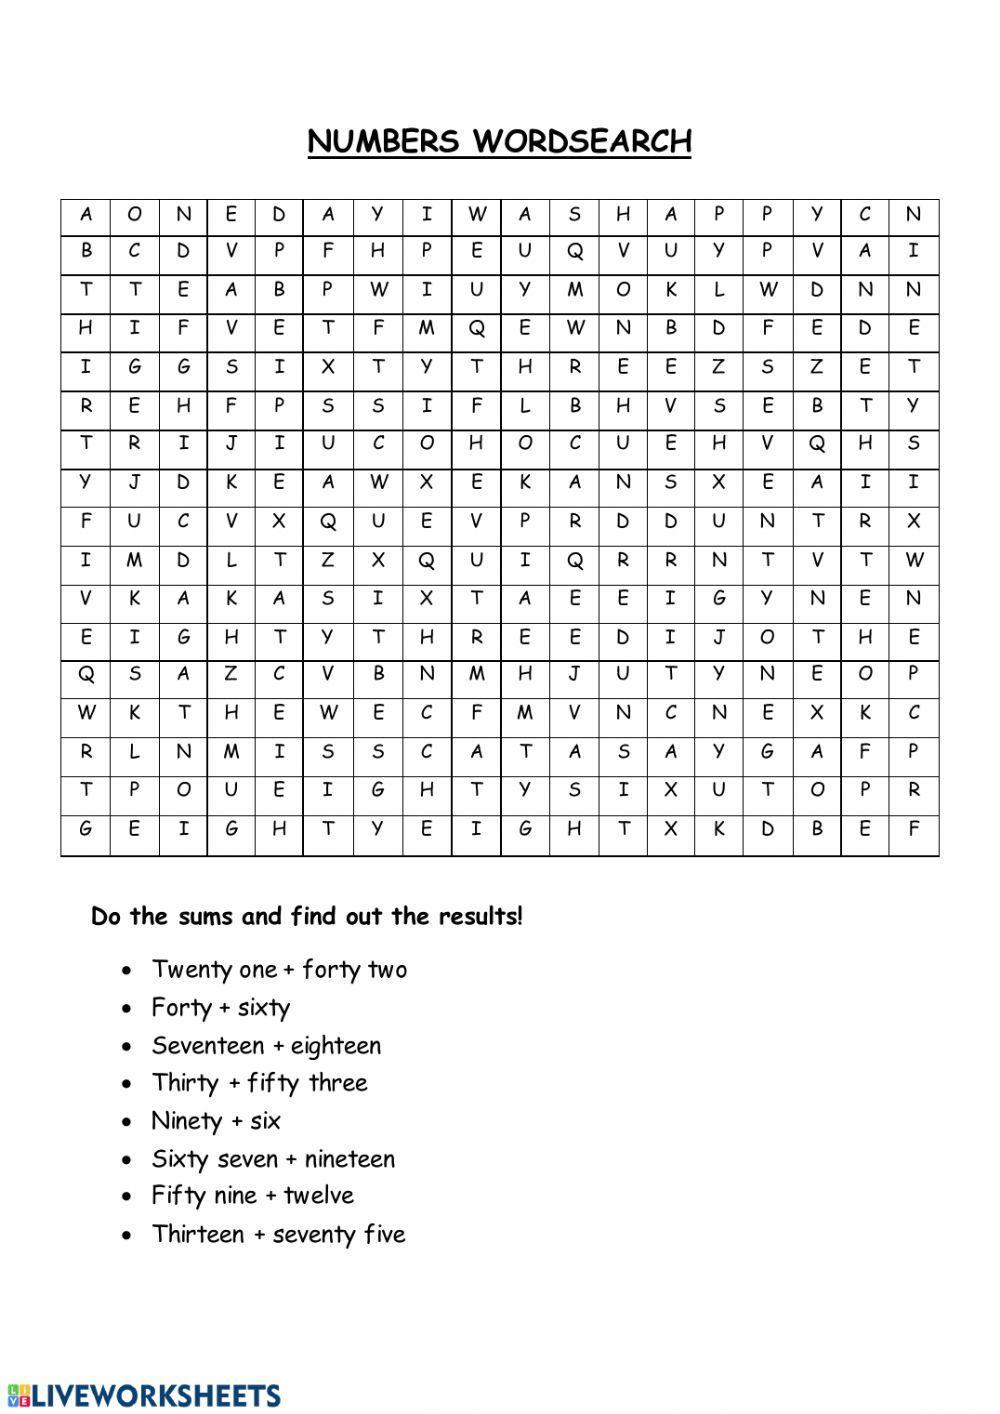 Numbers 1-100 wordsearch